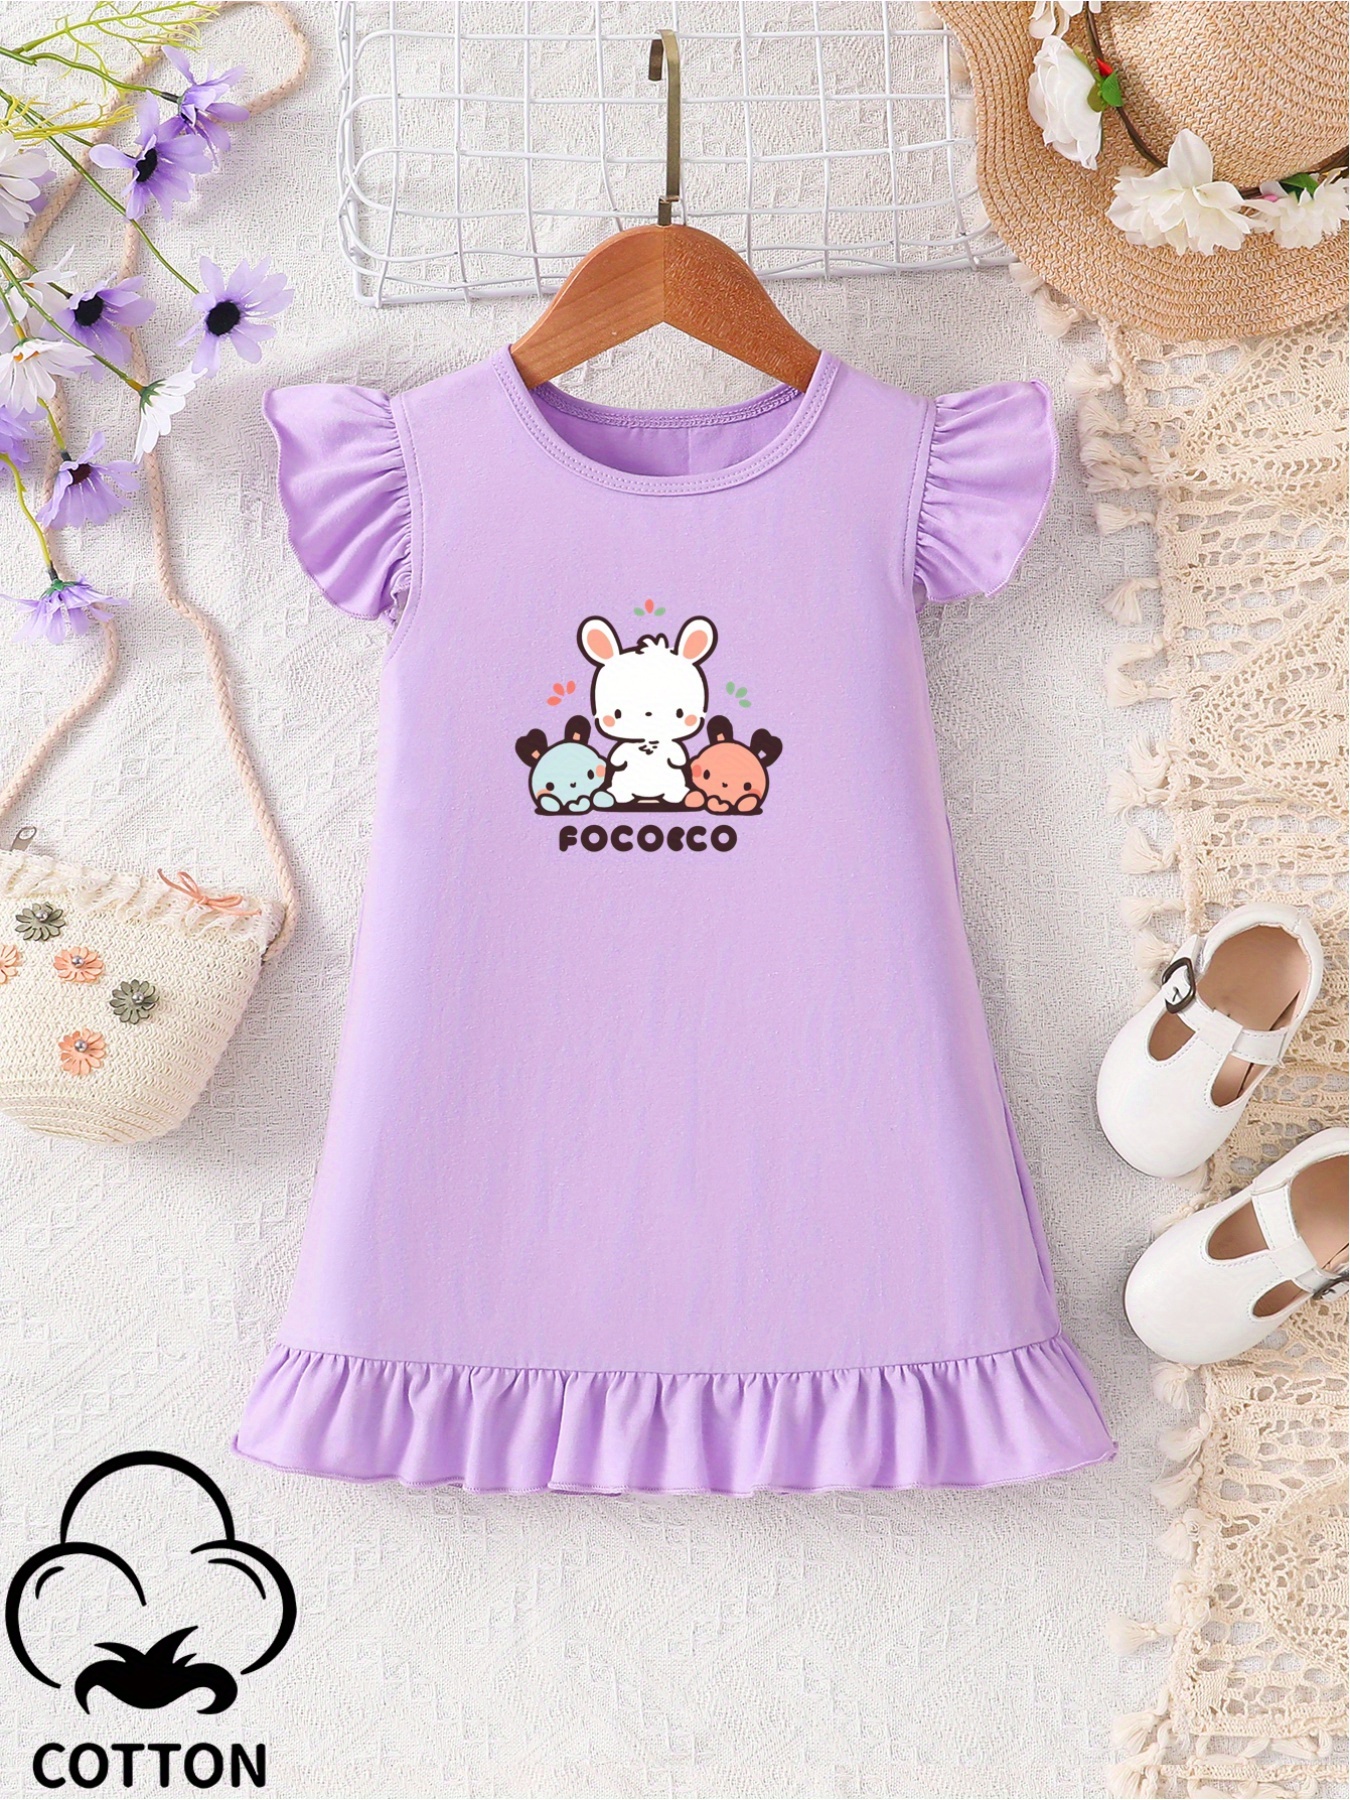 Baby Girl Clothes Toddler Kids Girls Cotton Short Sleeve Casual Dress  Cartoon Appliques Striped Princess Dresses